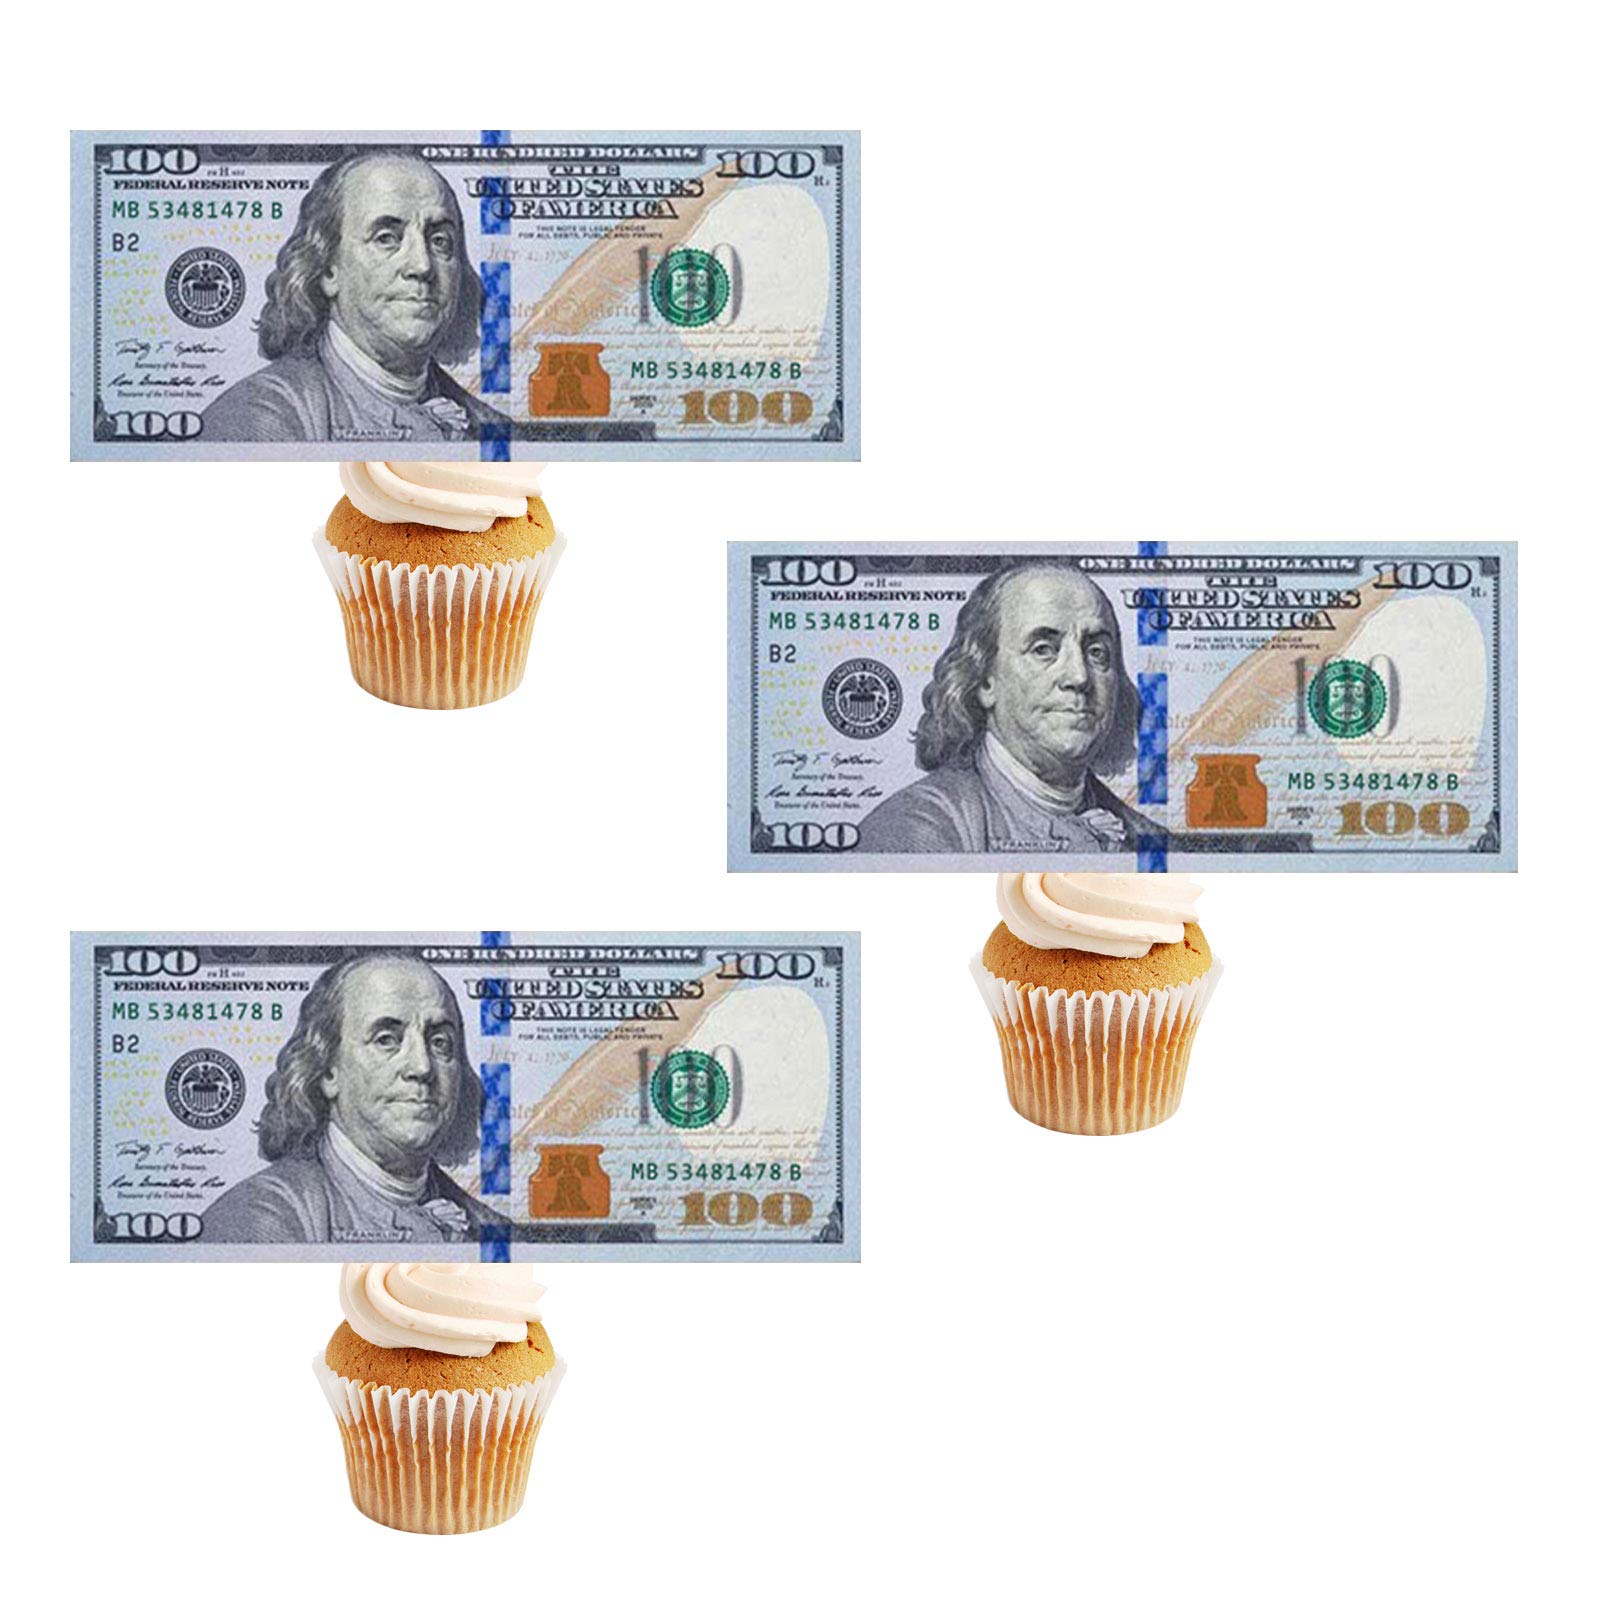  Morofme Edible Money Cake Topper 30pcs Edible 100 Dollar Bill  Cake Cupcake Toppers, Edible Money Image Wafer Paper Cake Decorations  Precut Fake Money for Birthday Party Supplies : Grocery & Gourmet